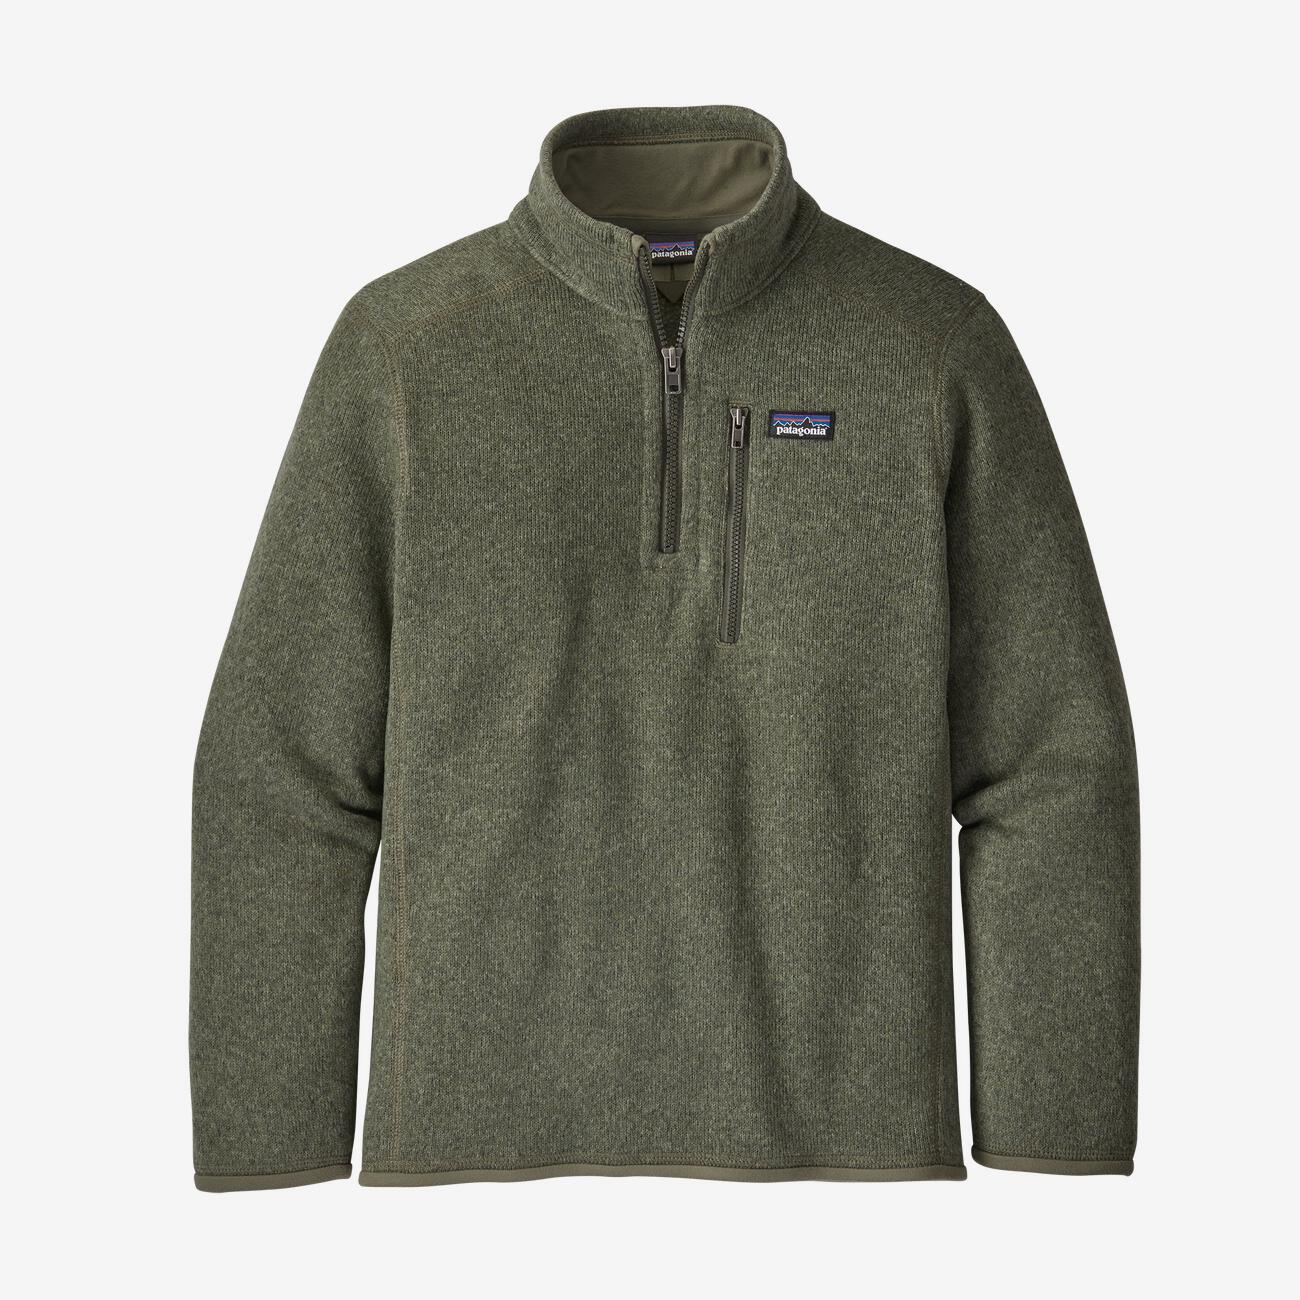 Patagonia Boy's Better Sweater 1/4 Zip-CHILDRENS CLOTHING-Industrial Green-S-Kevin's Fine Outdoor Gear & Apparel